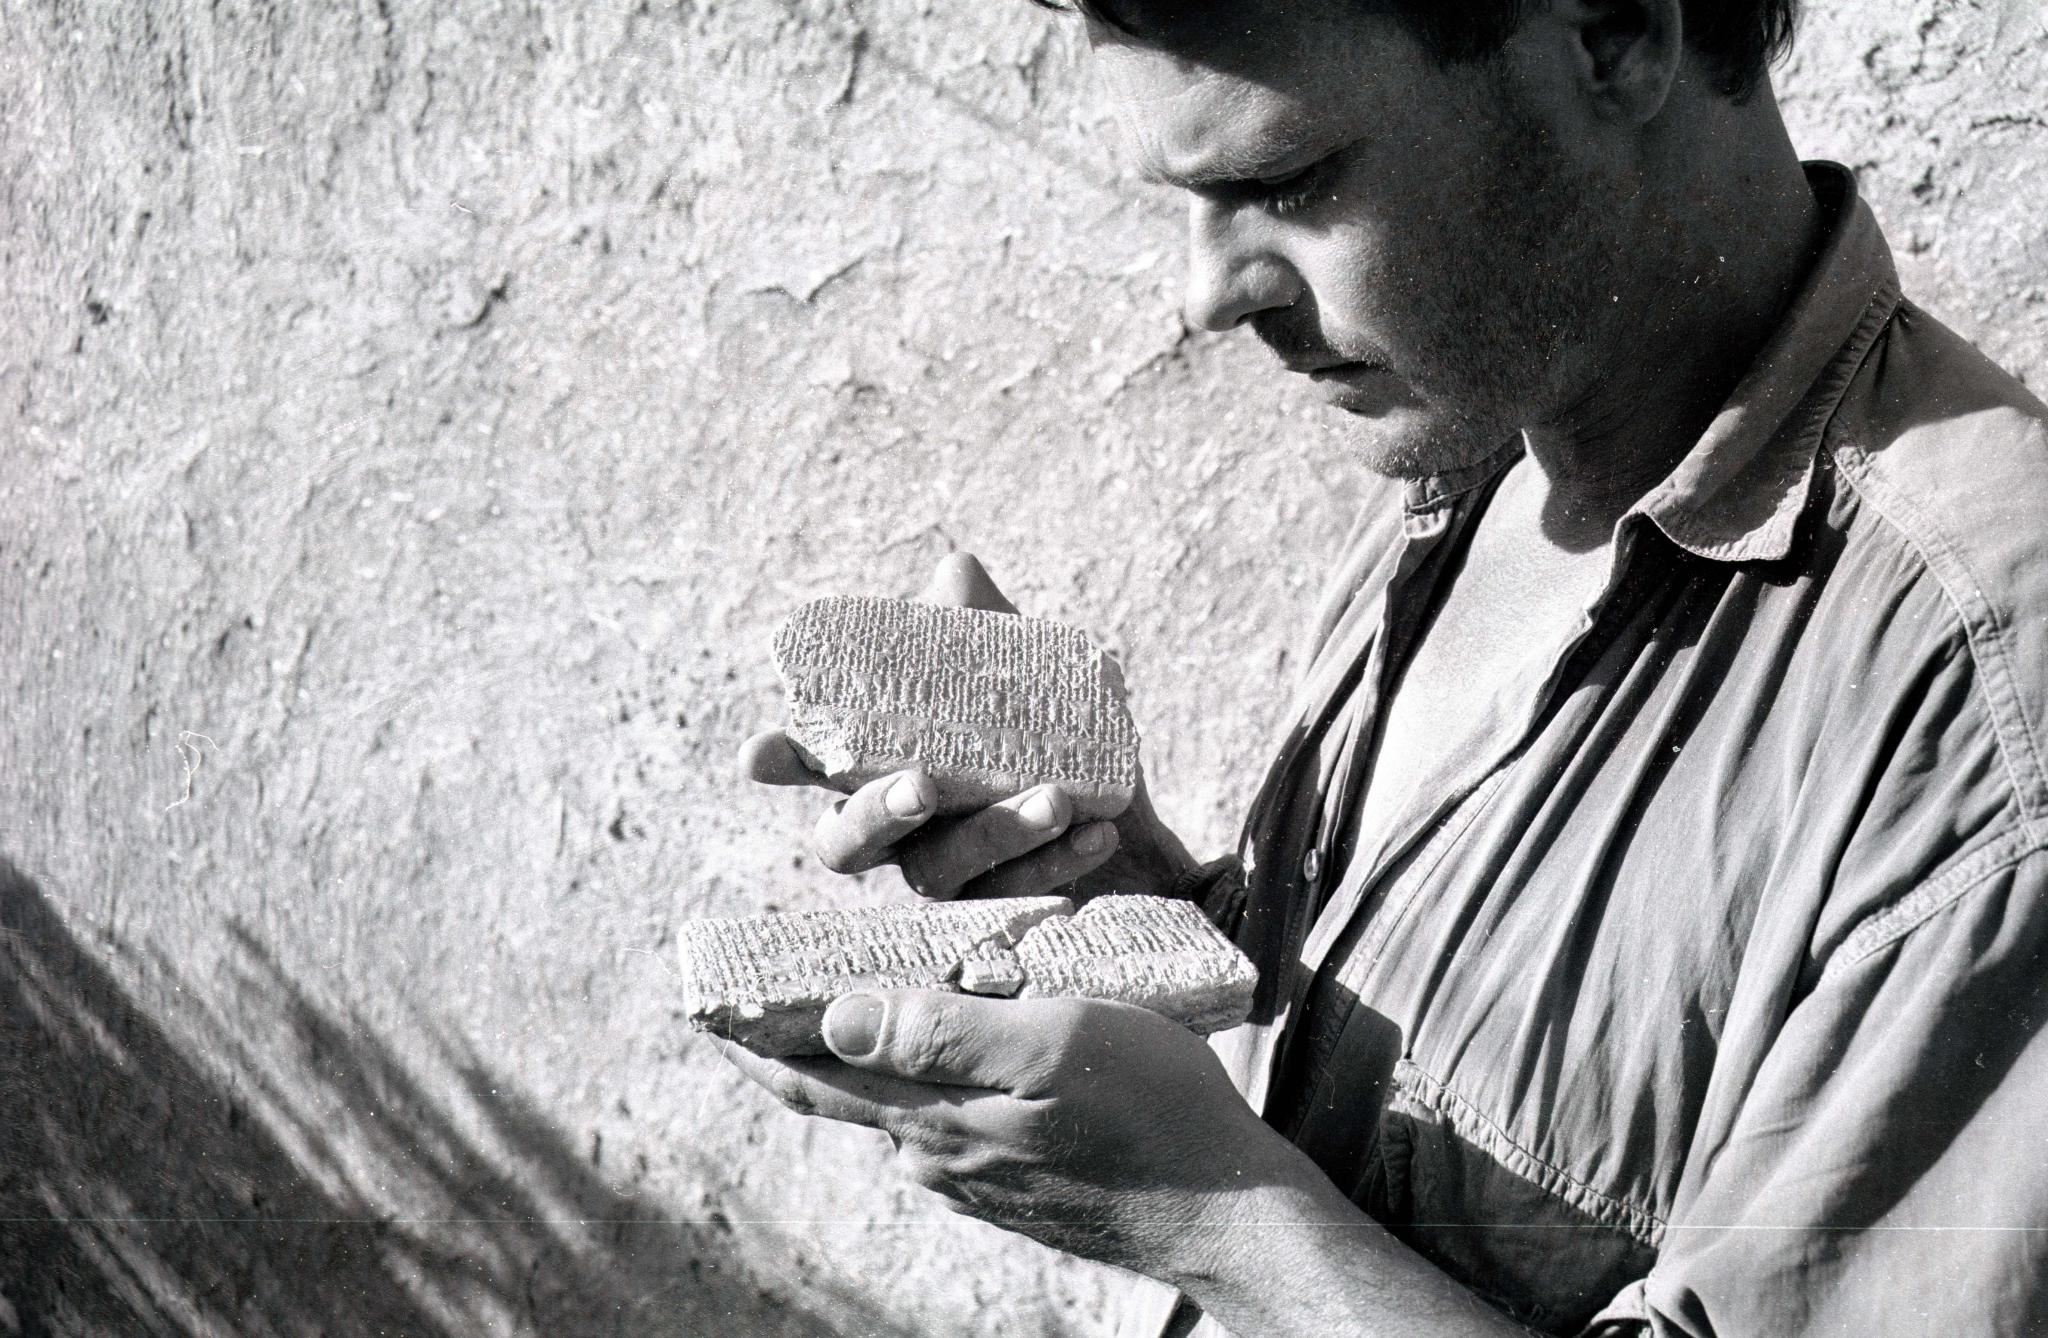 Peter Akkermans studying two clay tablets found at Tell Sabi Abyad